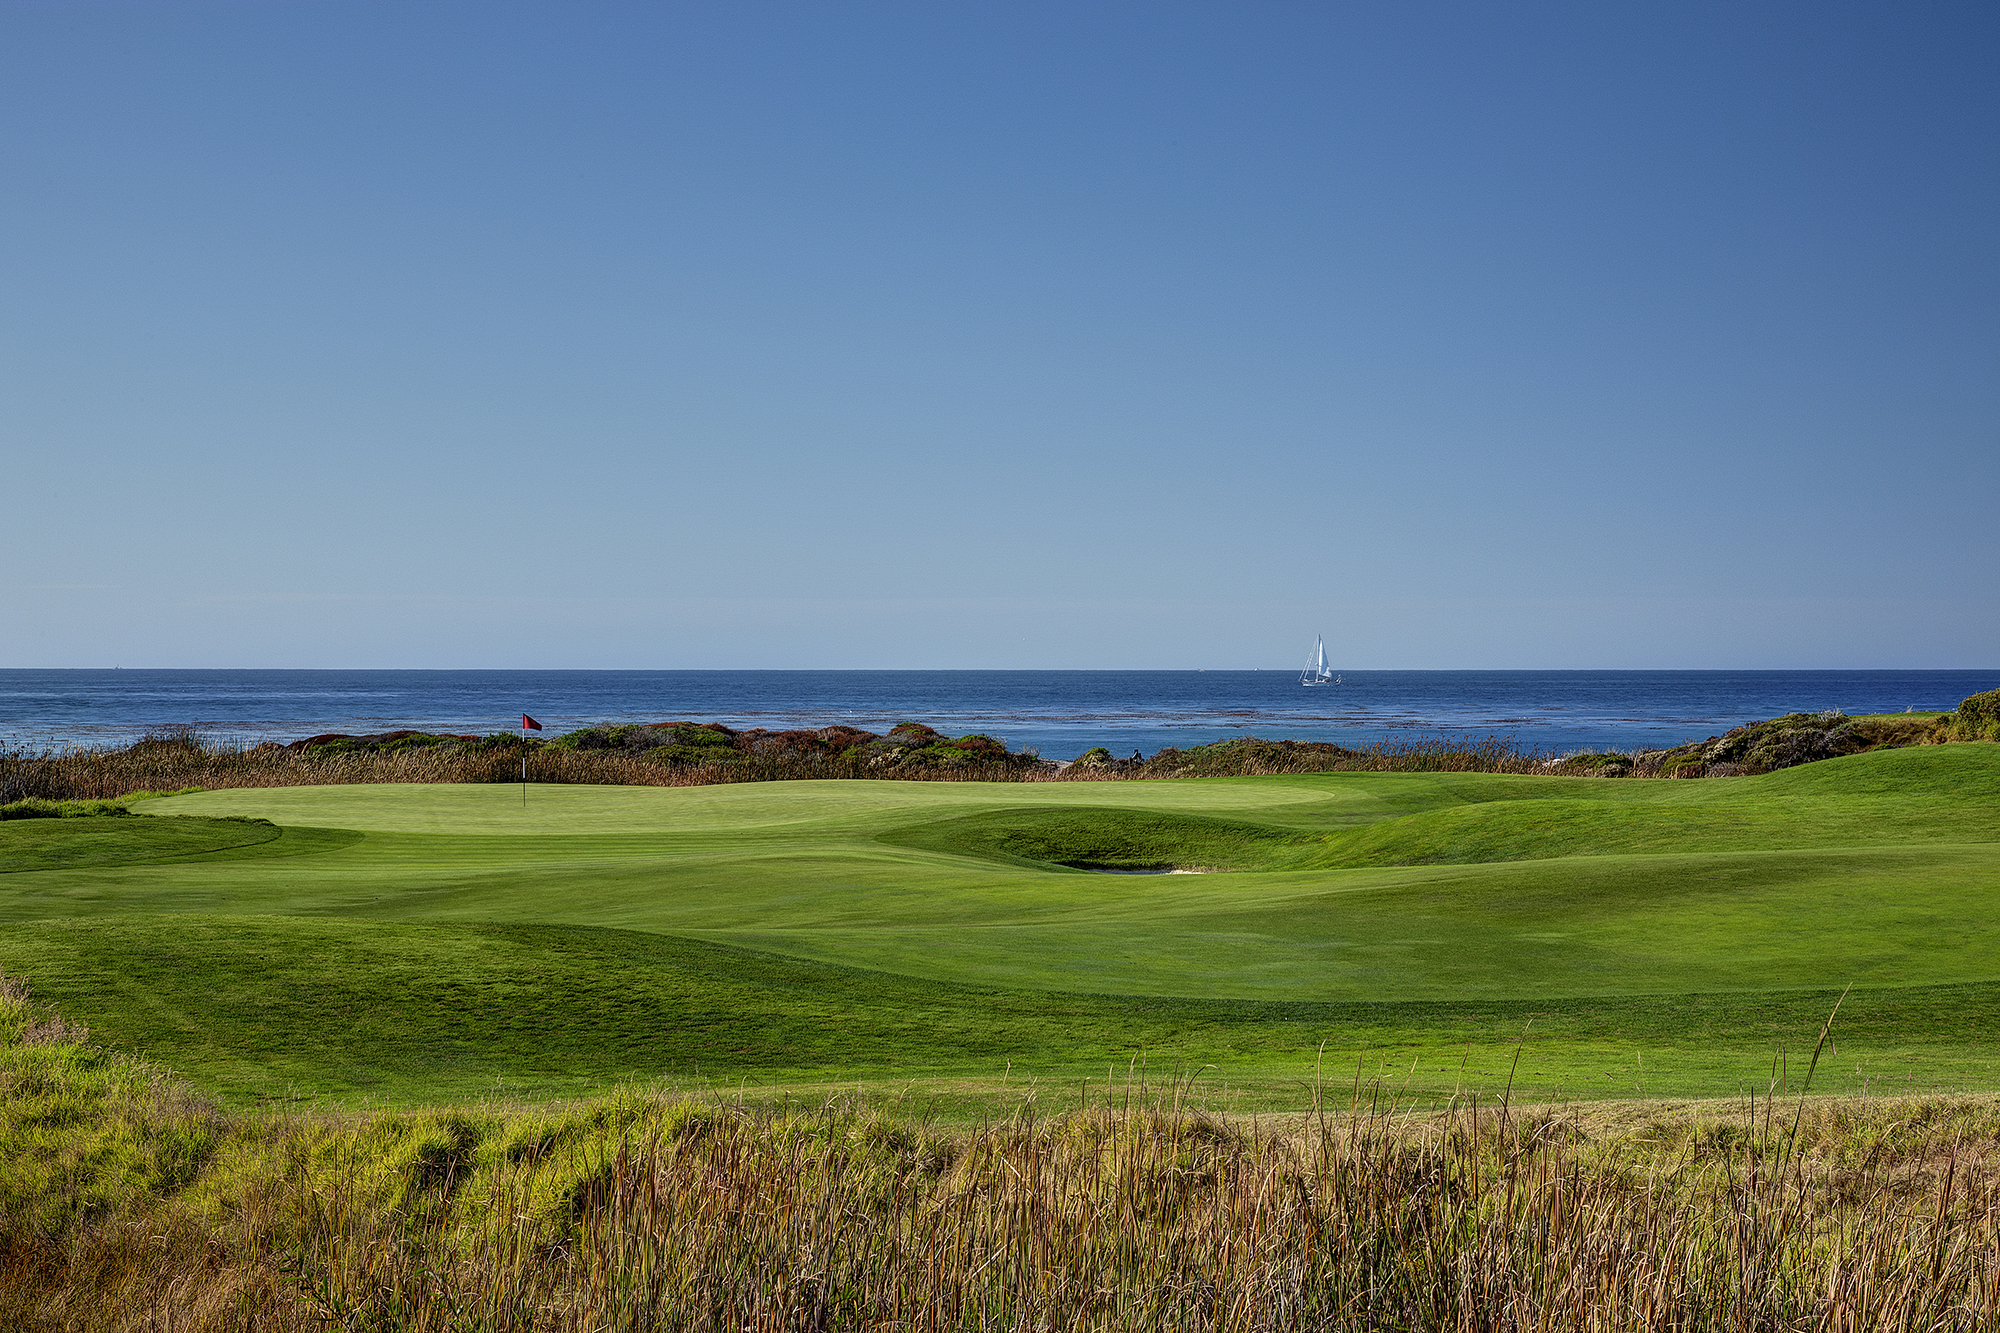 The 7th green at The Links of Spanish Bay with the Pacific Ocean and a sail boat in the background